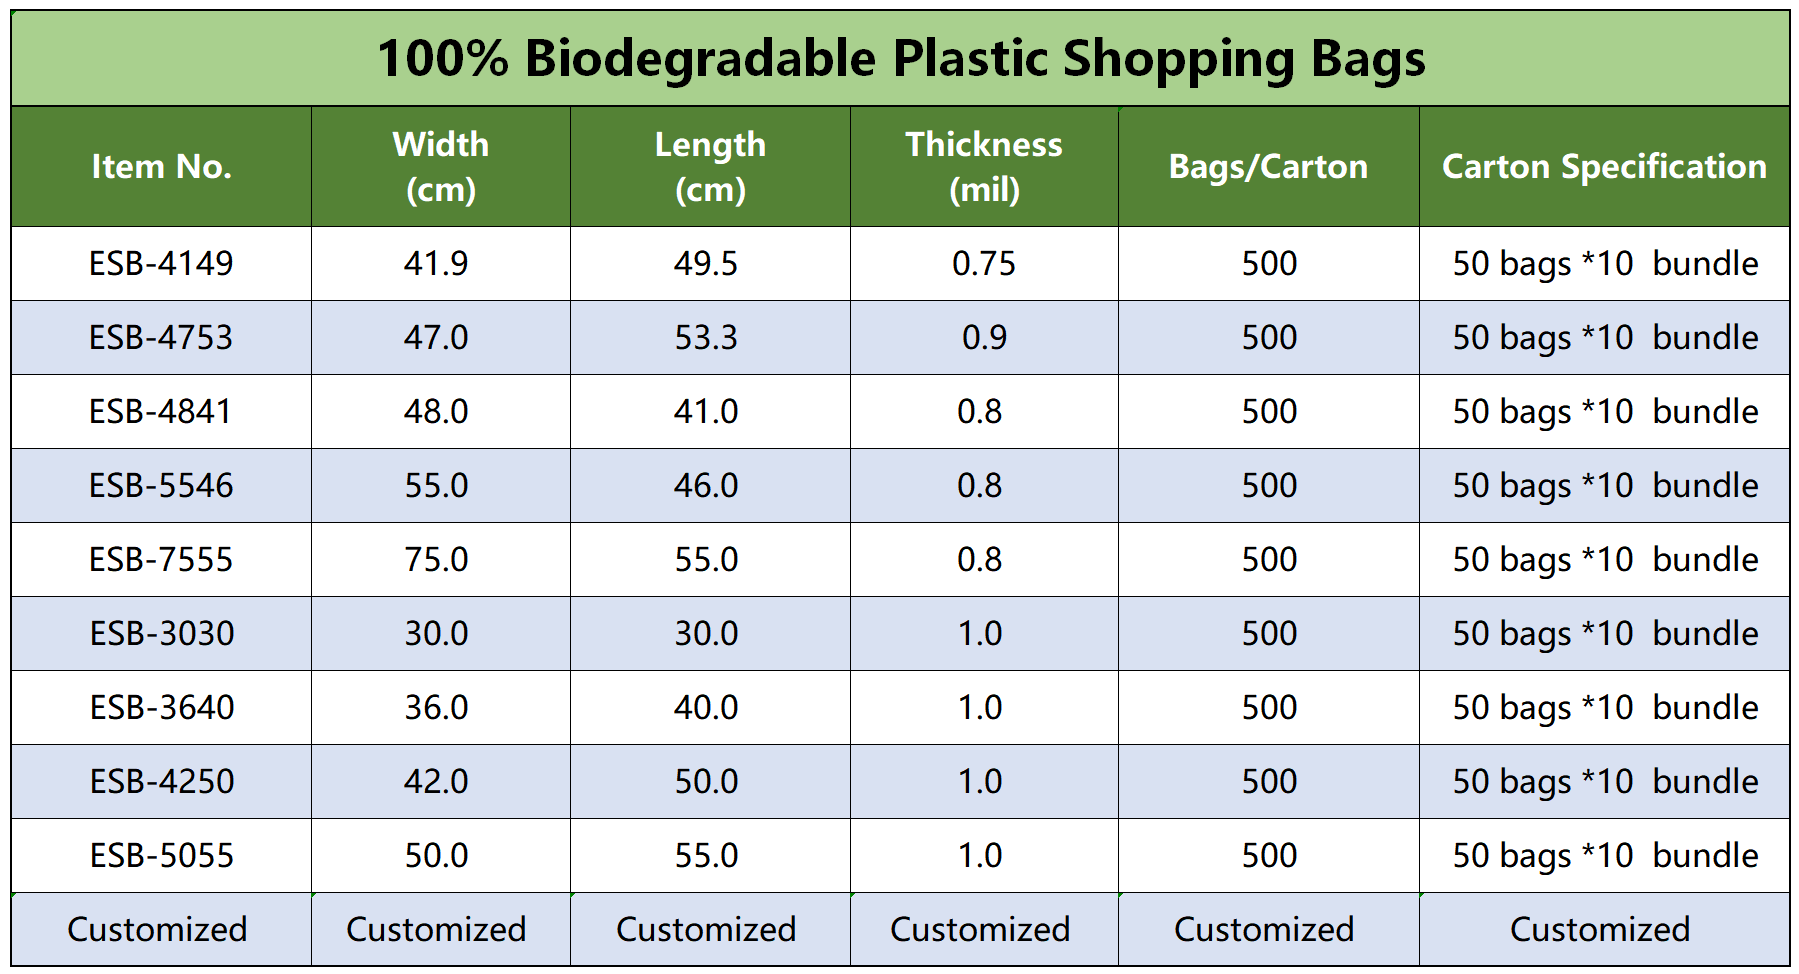 100% Biodegradable Plastic Shopping Bags